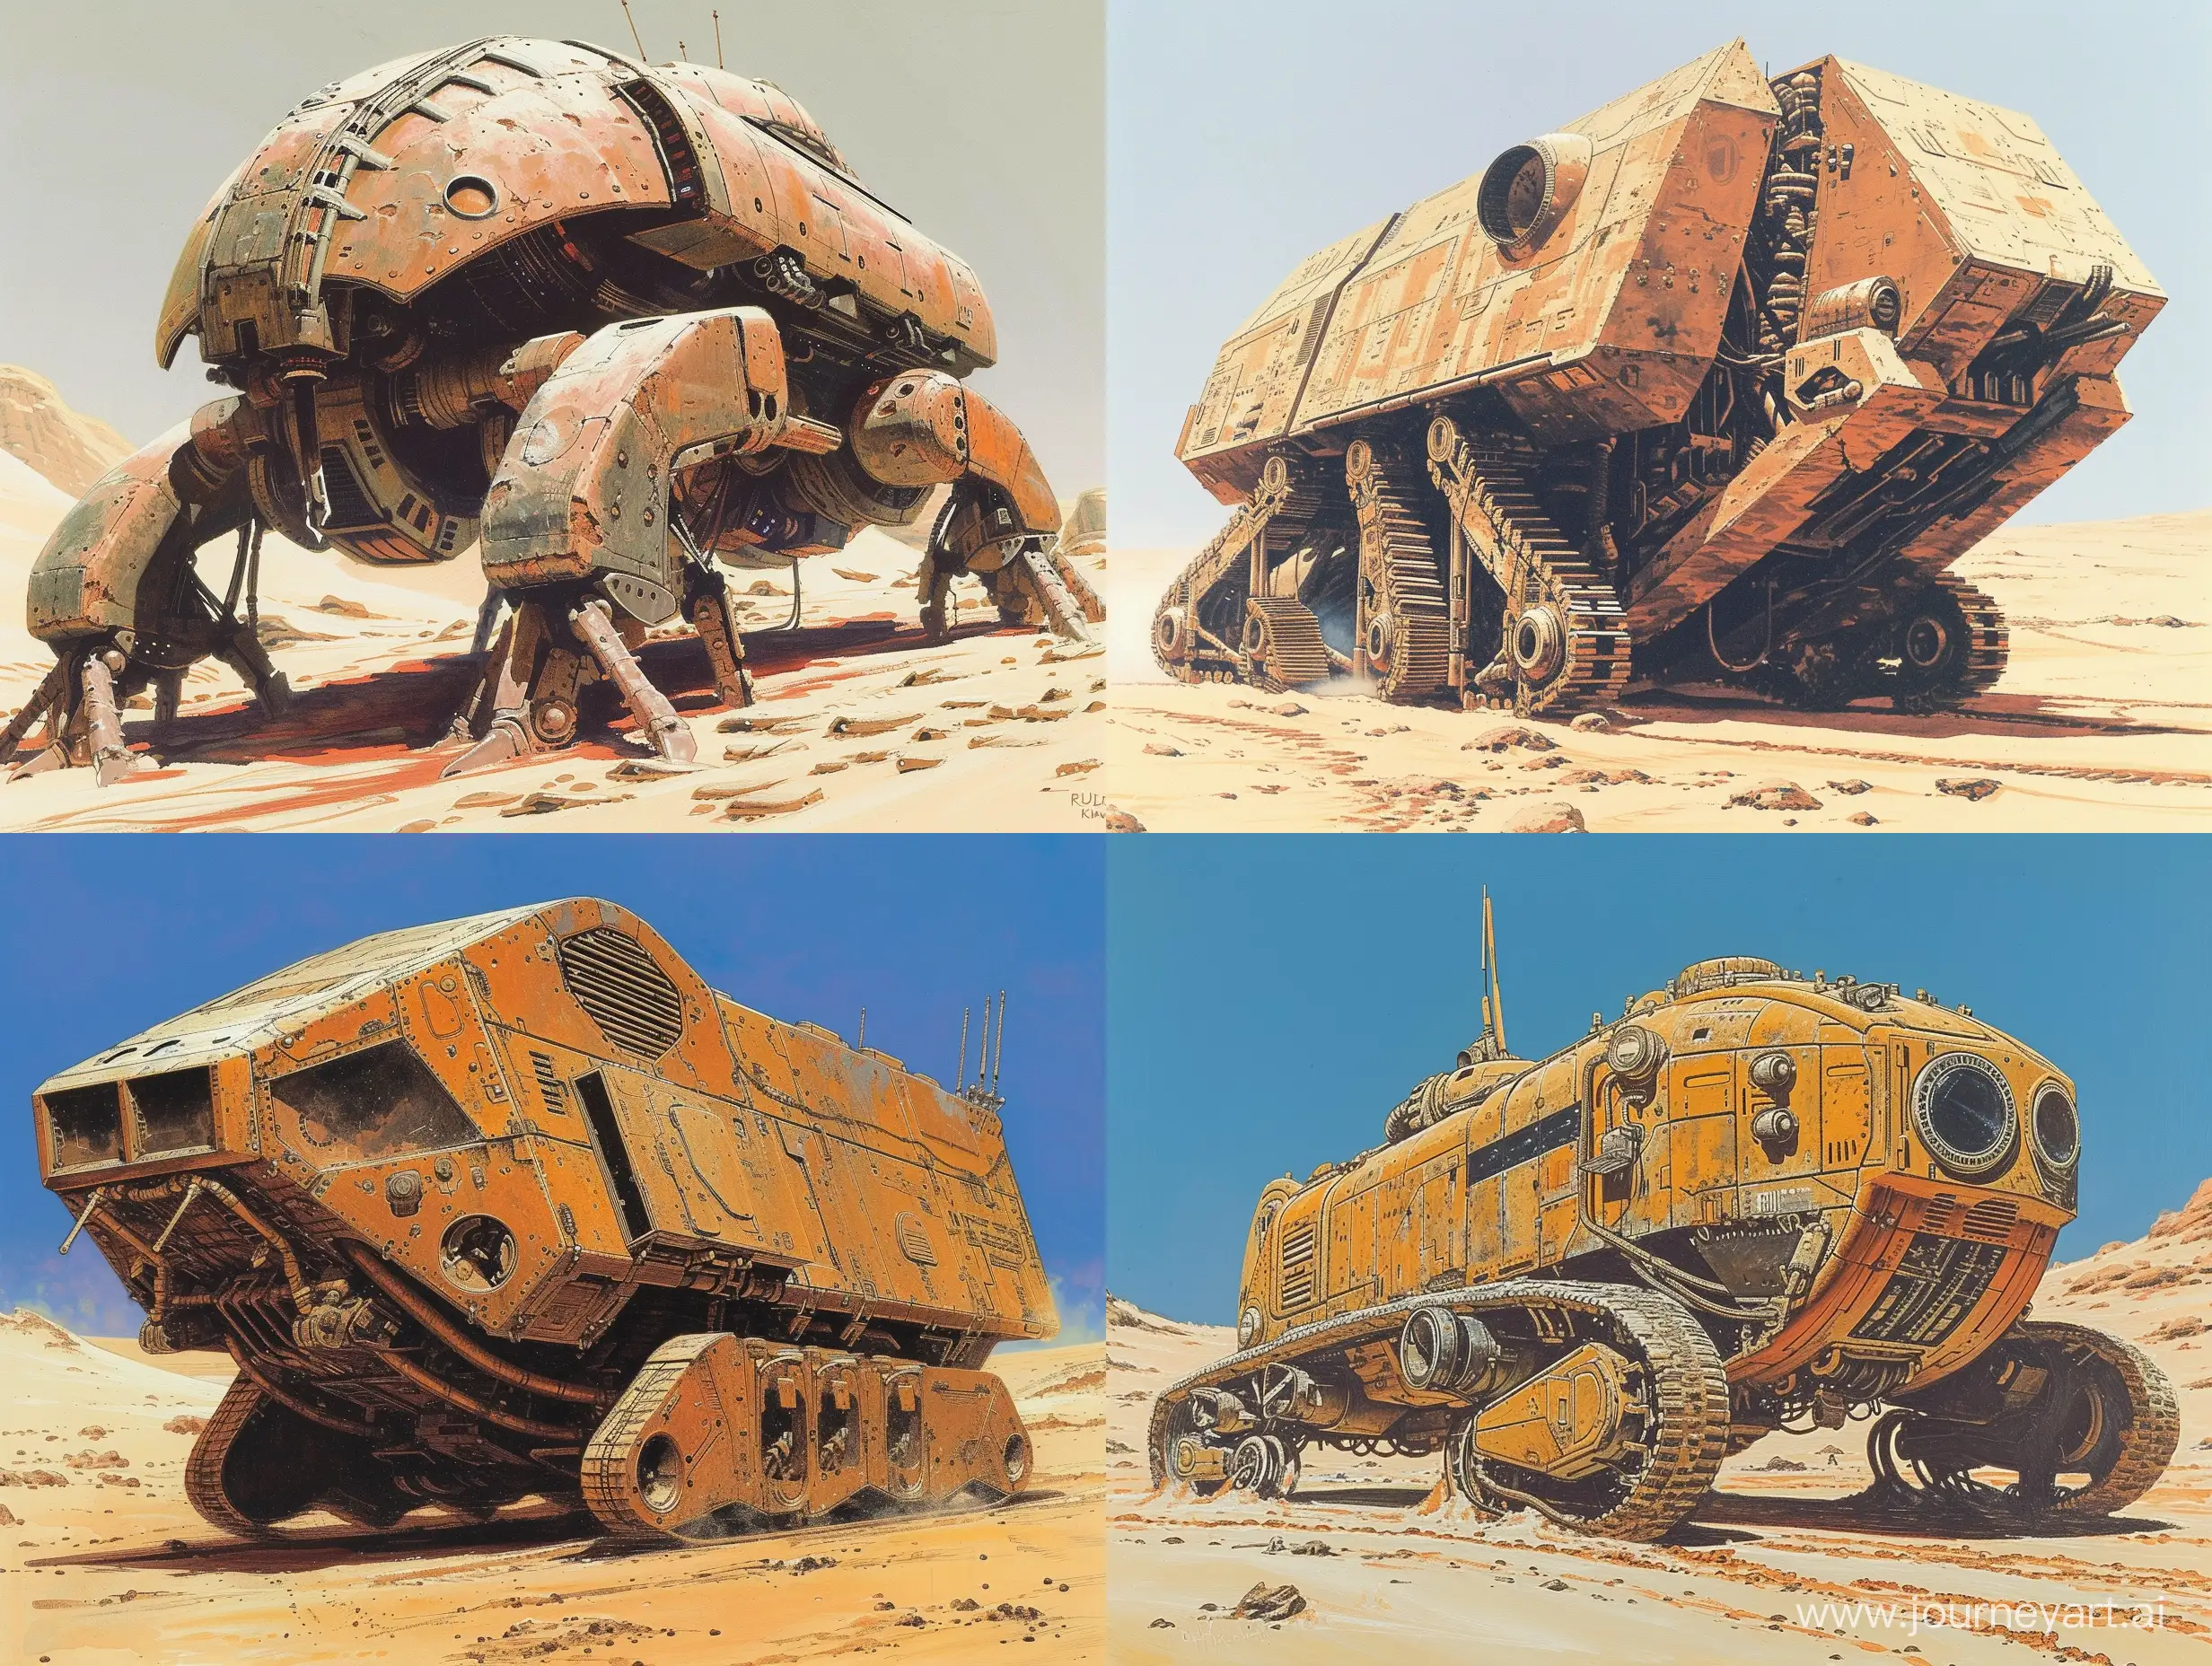 Concept art of a sandcrawler from Jodorowsky's Dune by Ralph McQuarrie. Dune. Retro Science Fiction Art style. in color.

